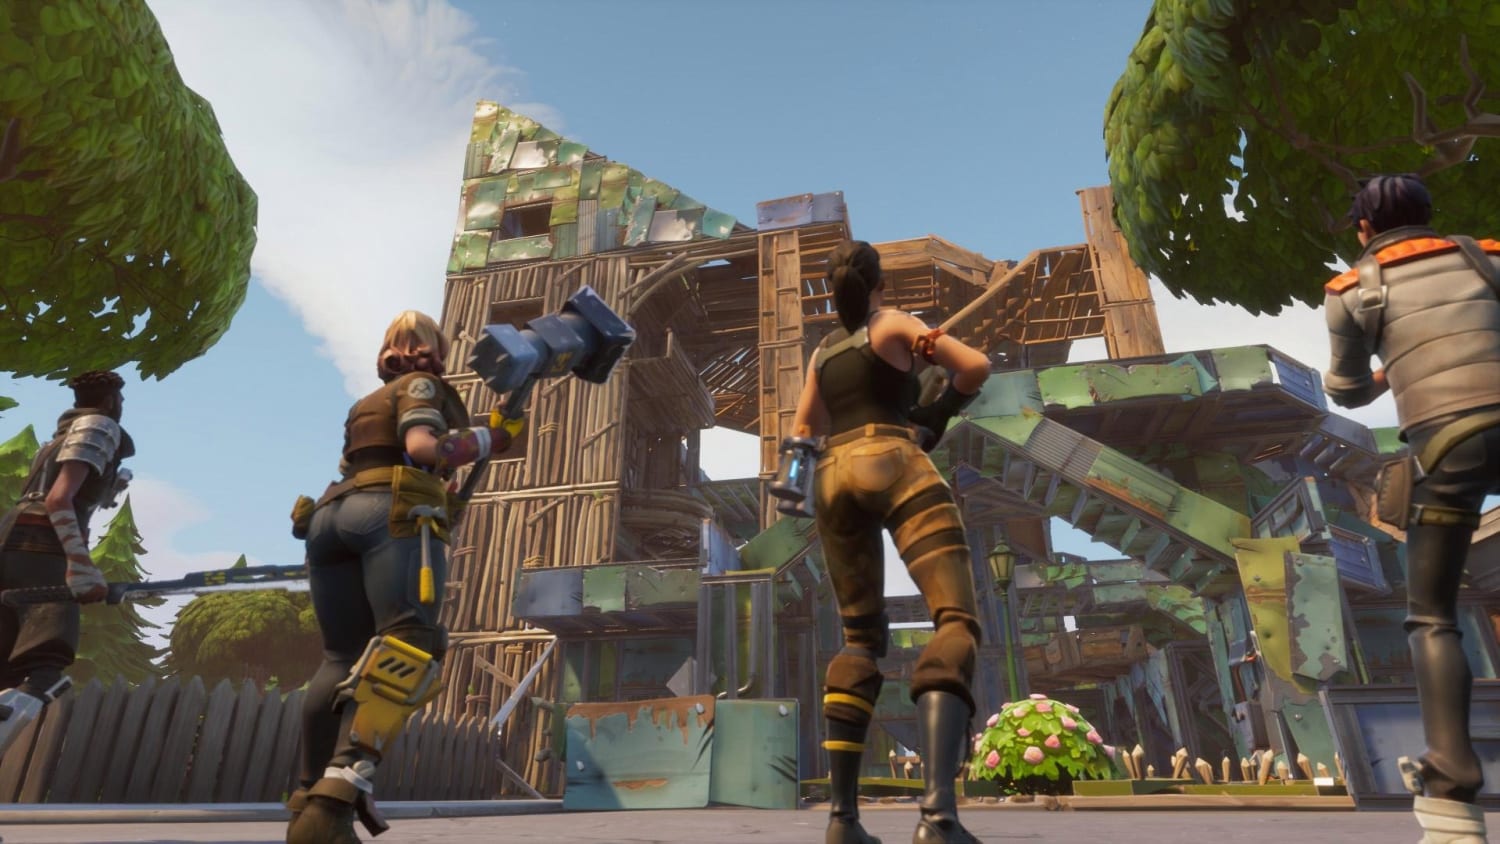 Find People To Build In Fortnite With Fortnite Players The 10 Types Of Players We All Know